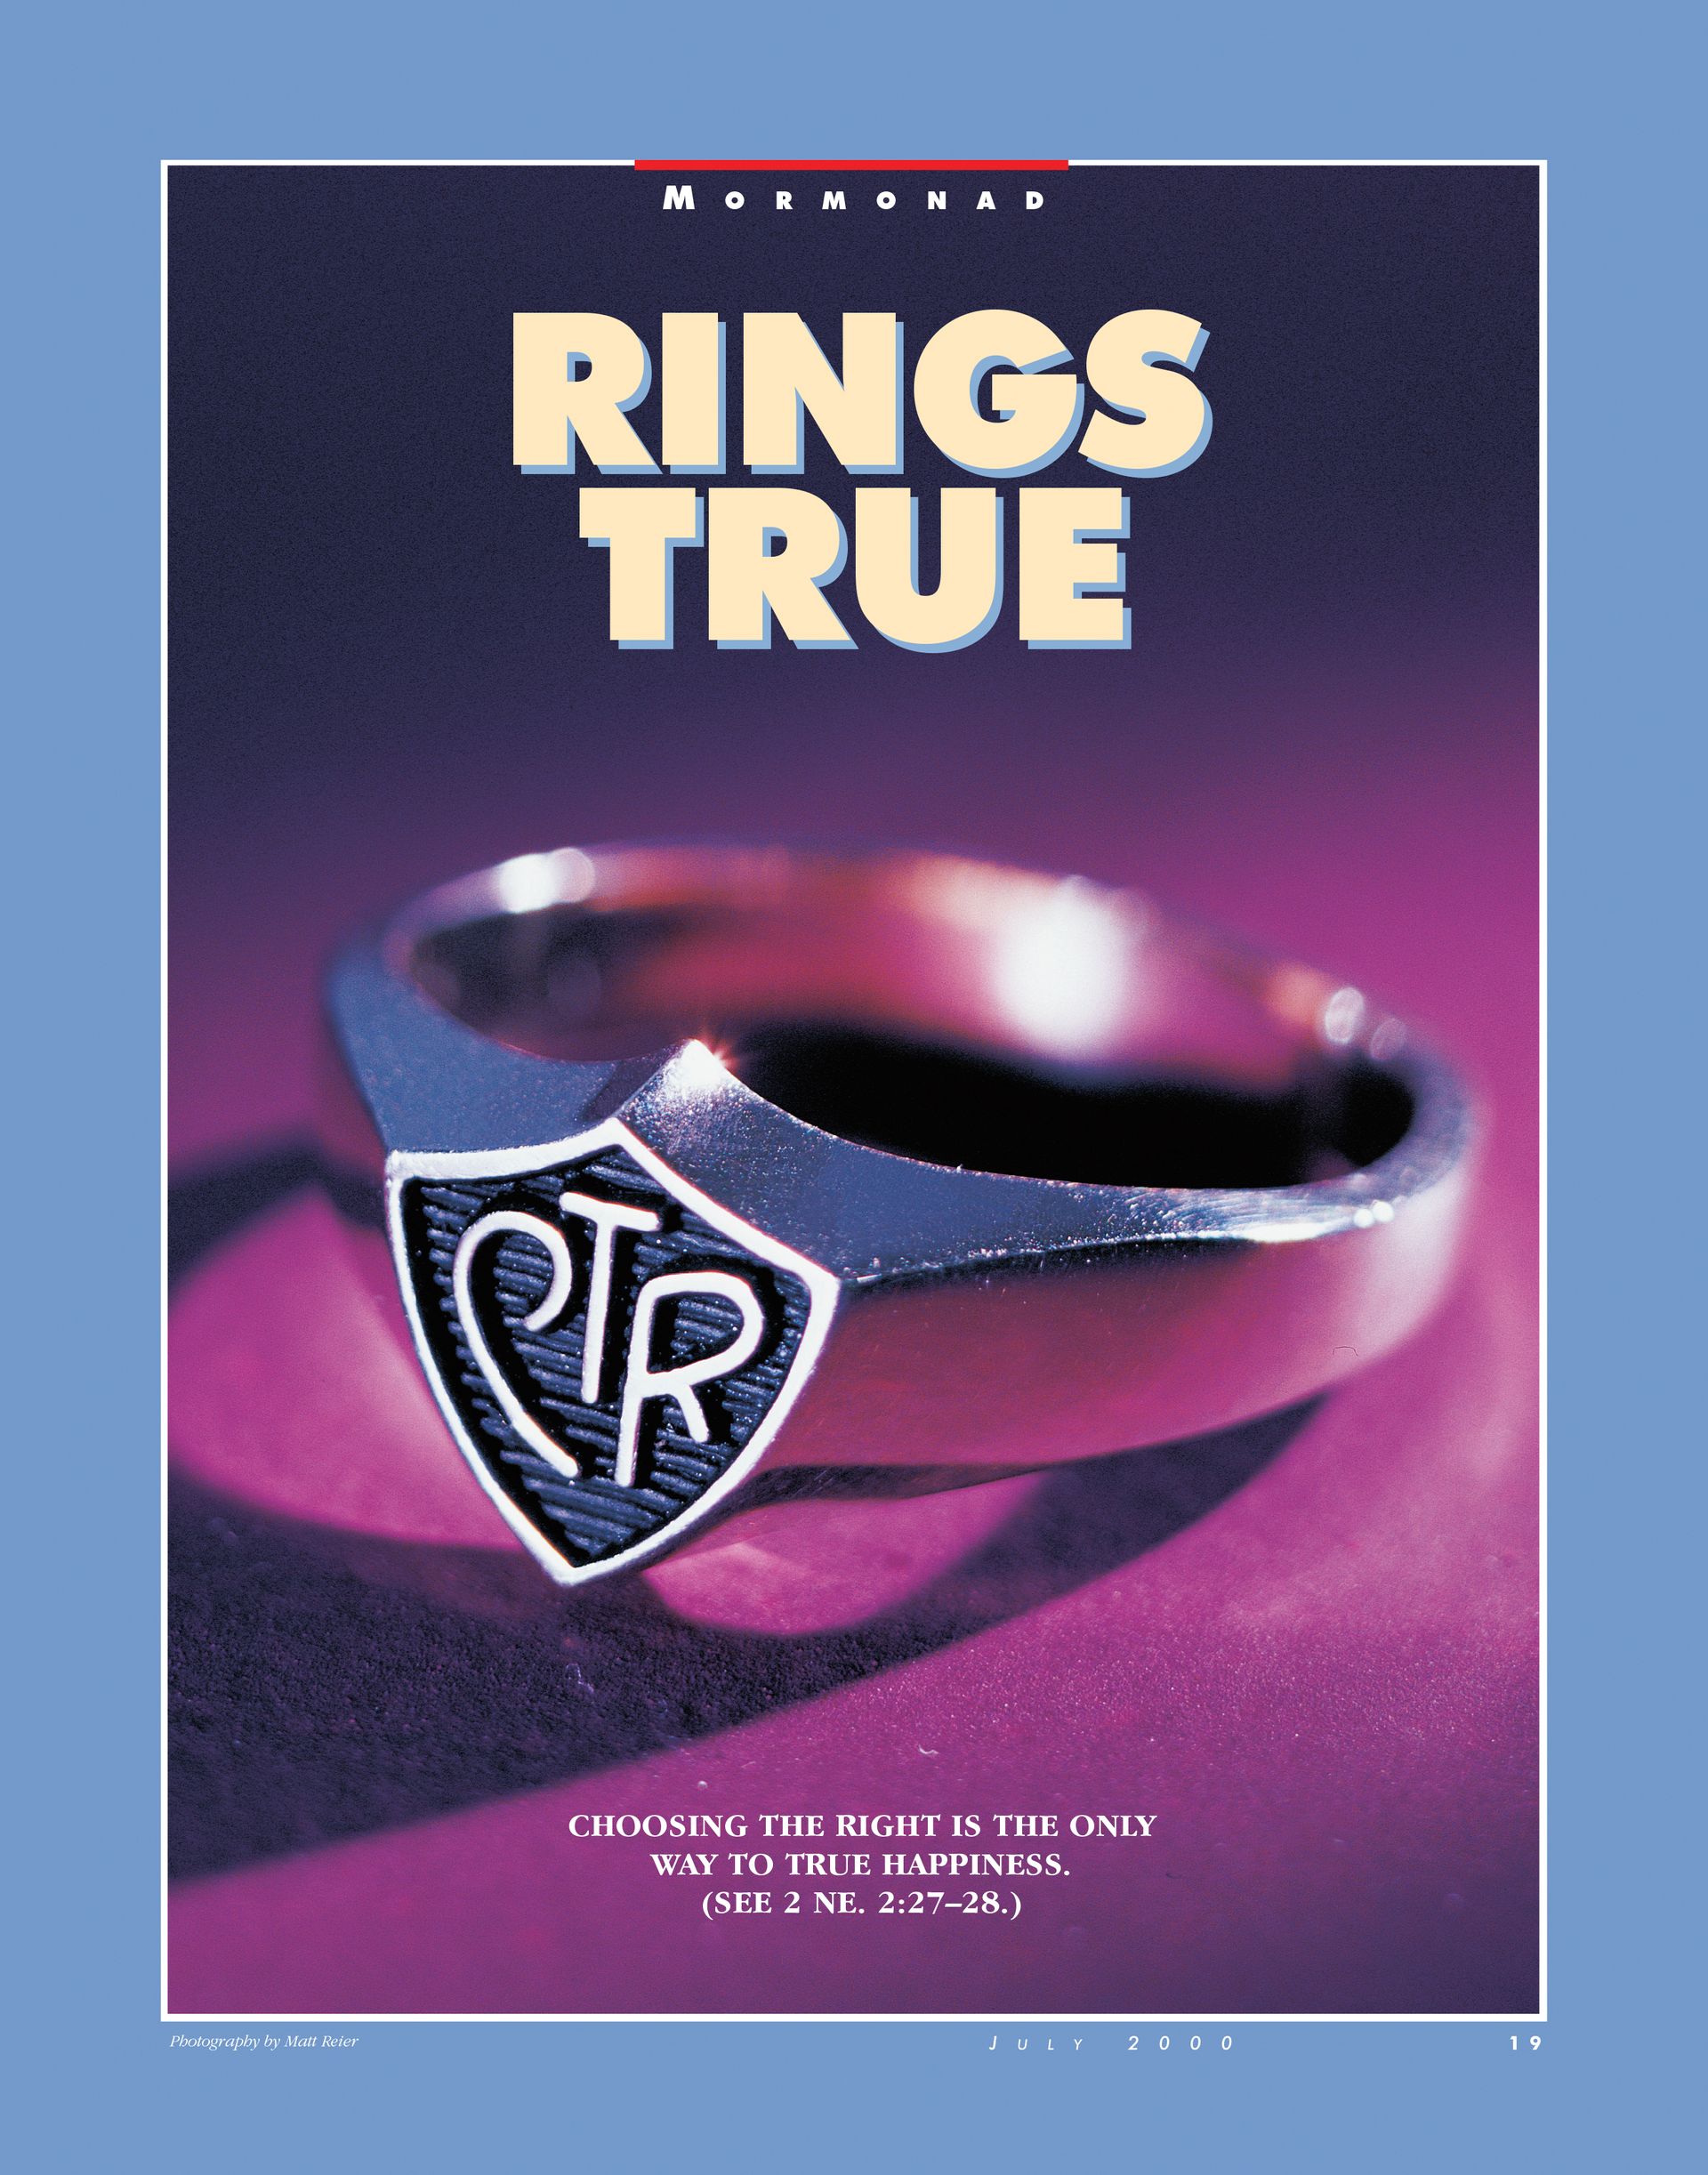 Rings True. Choosing the right is the only way to true happiness. (See 2 Ne. 2:27–28.) July 2000 © undefined ipCode 1.